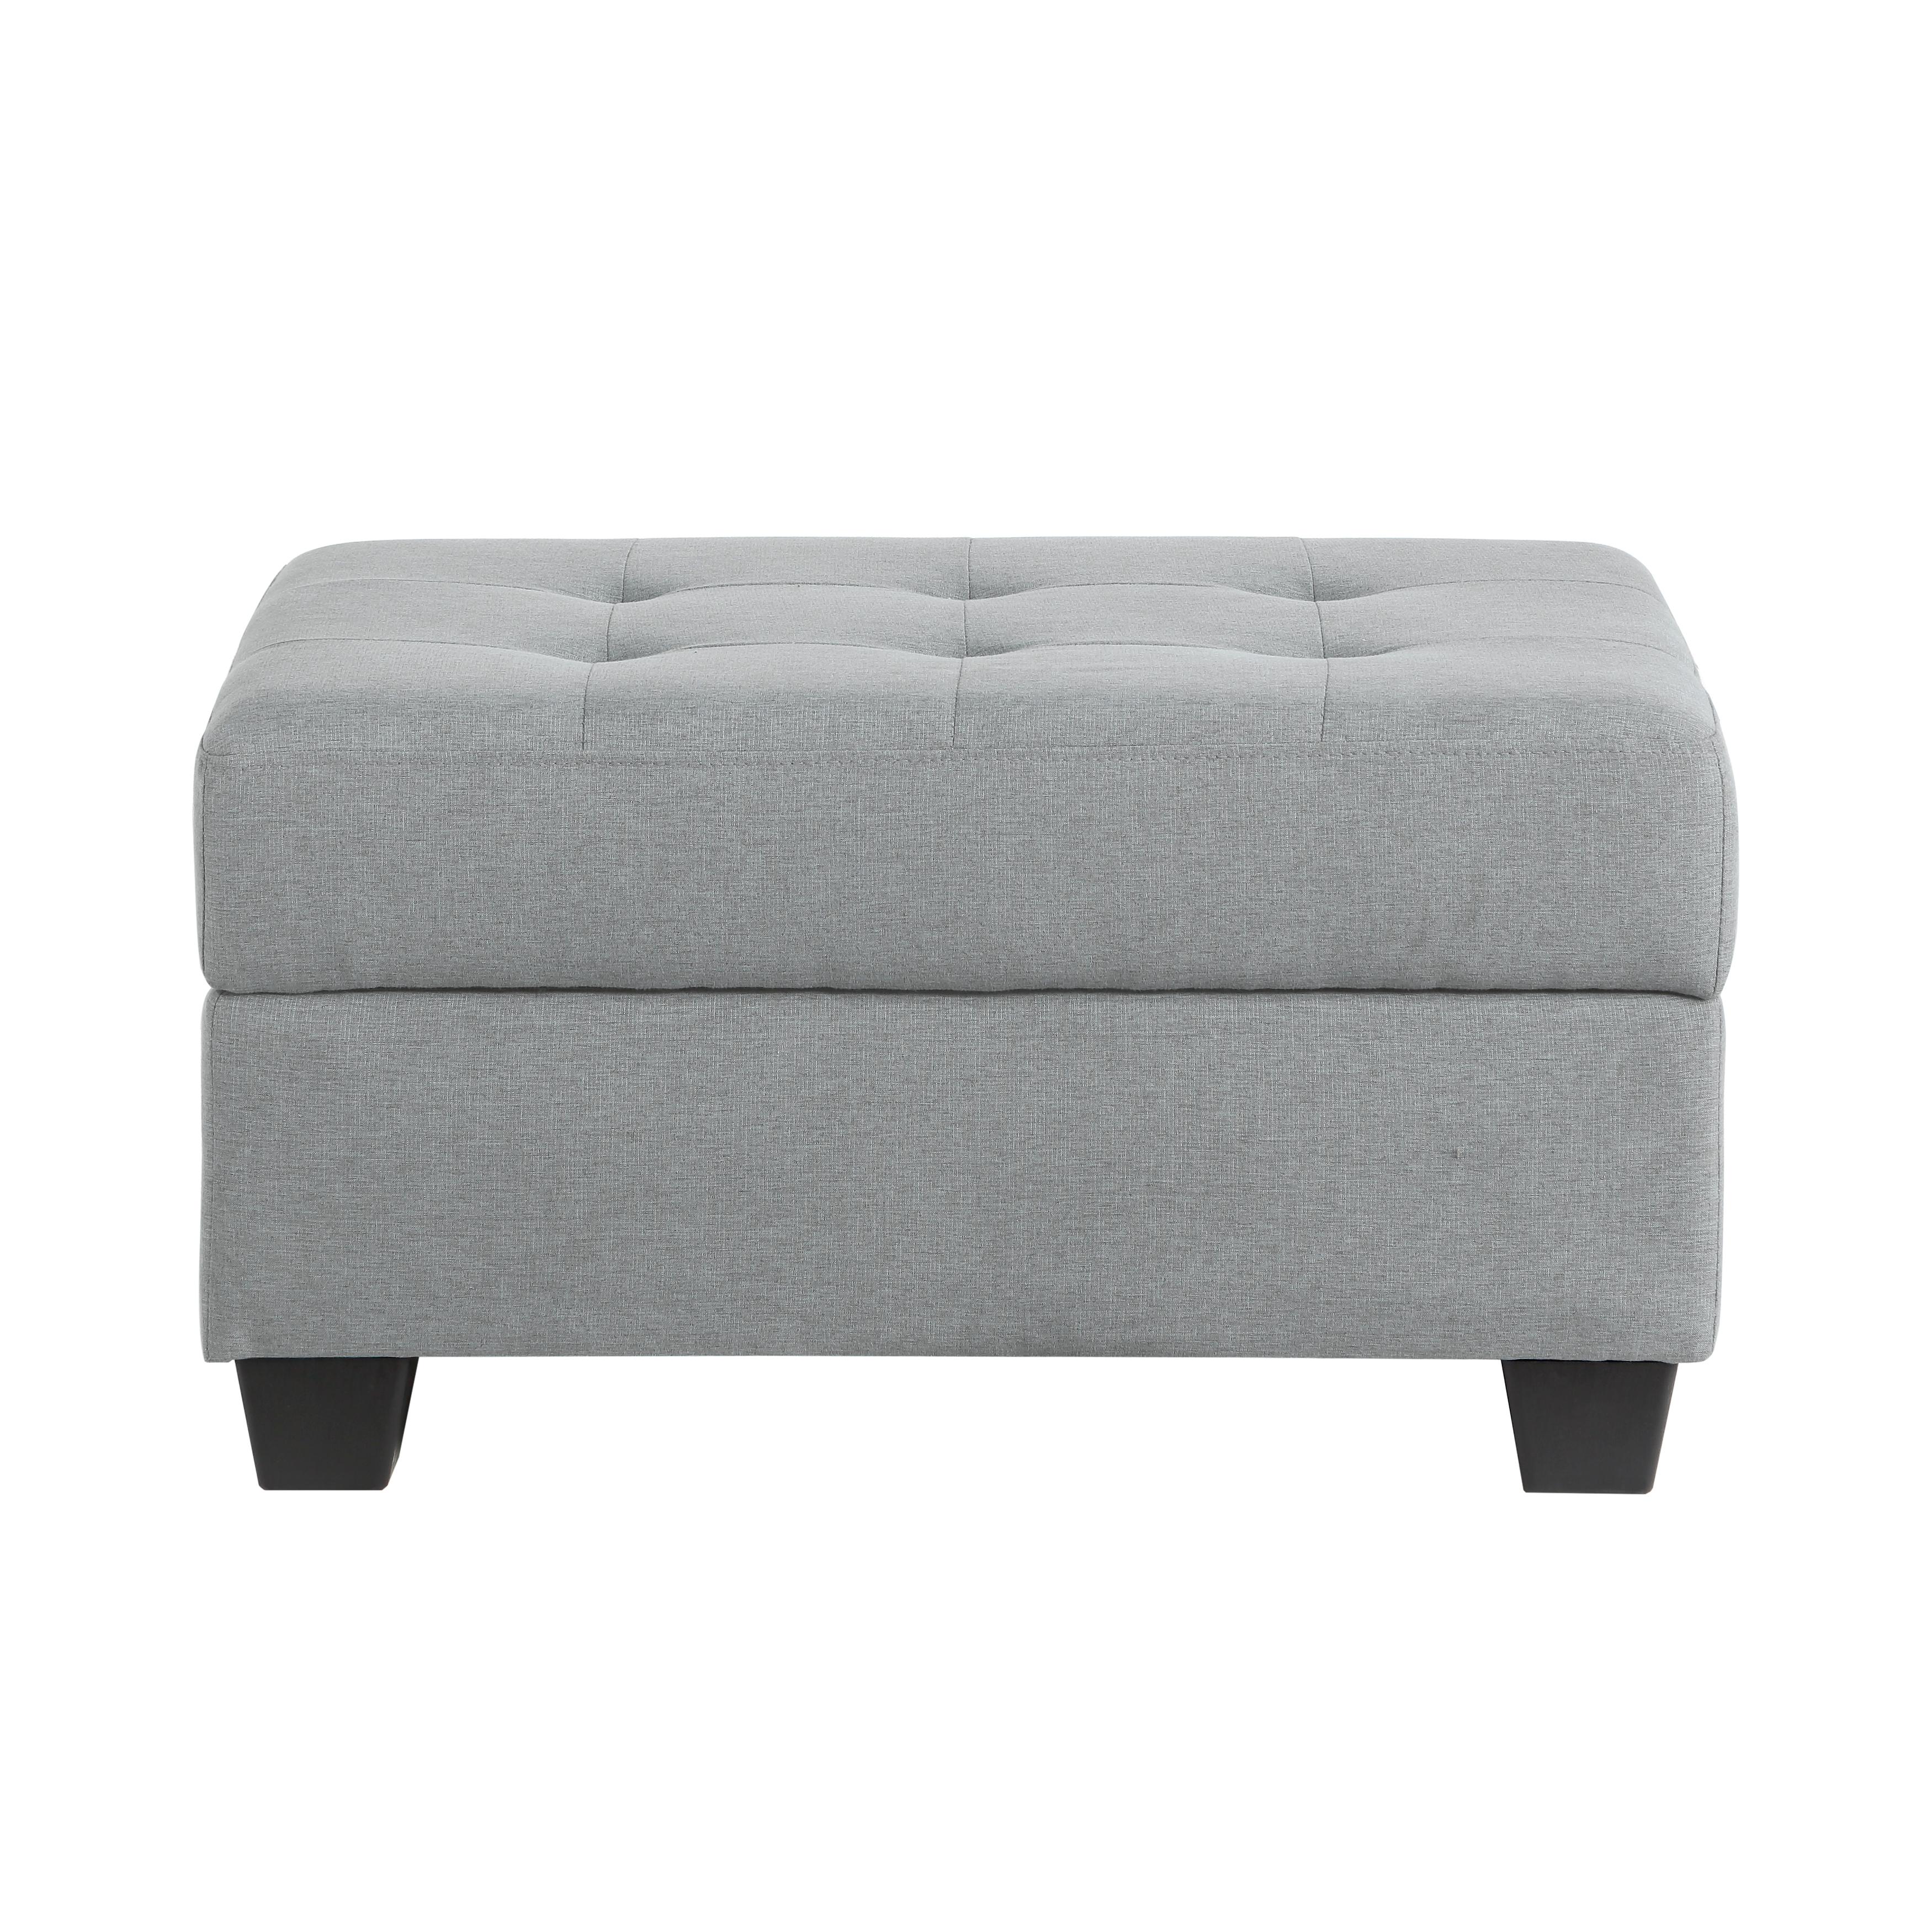 

    
Transitional Light Gray Textured Reversible 2-Piece Sectional w/Ottoman Homelegance 9367GY*SC Dunstan
